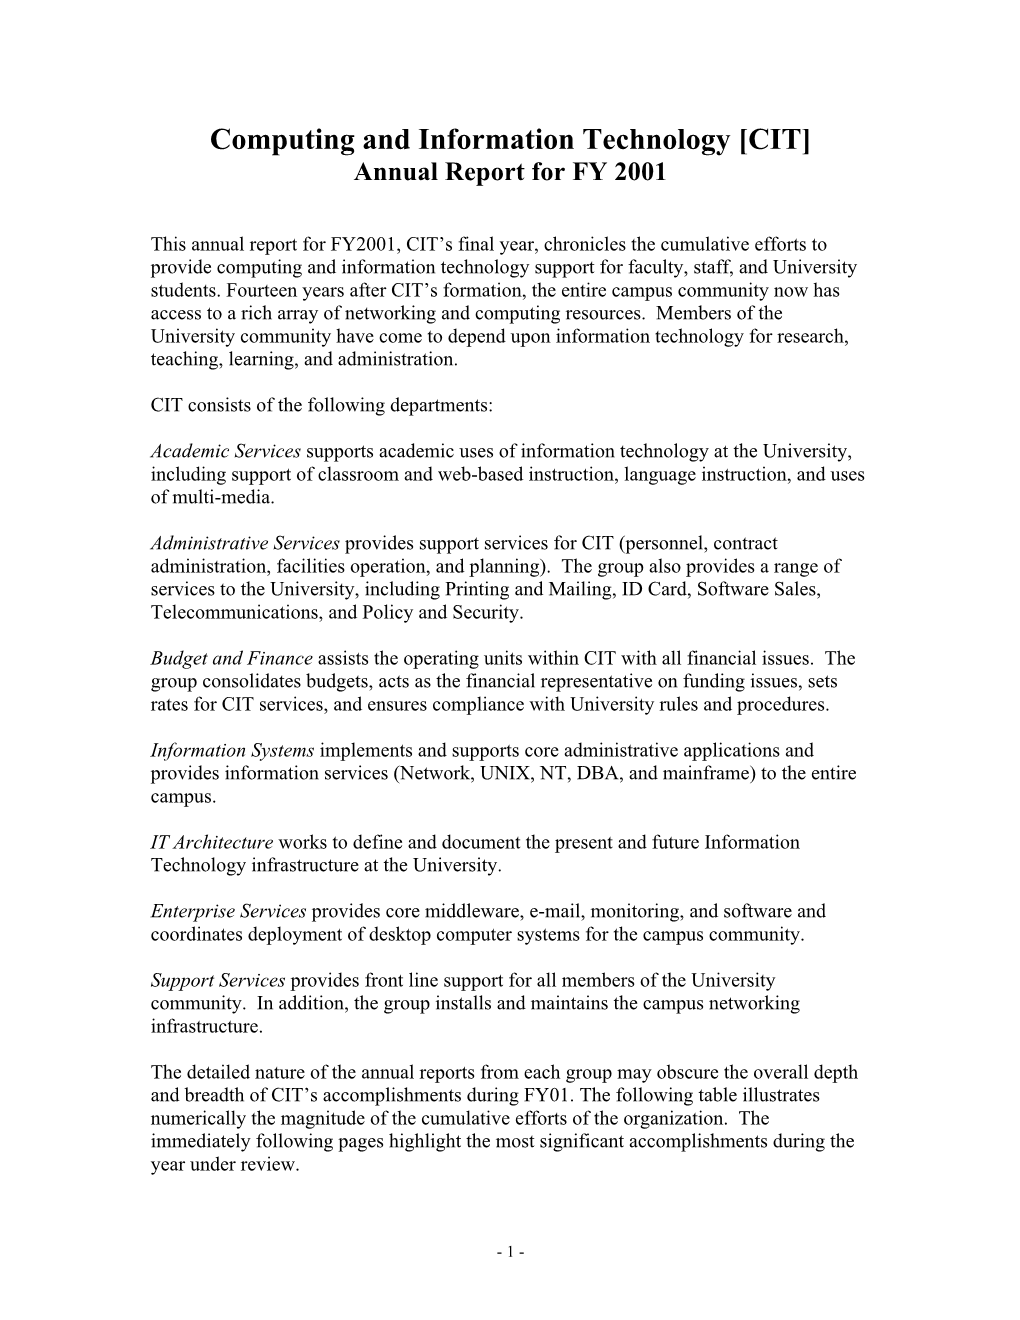 Computing and Information Technology [CIT] Annual Report for FY 2001